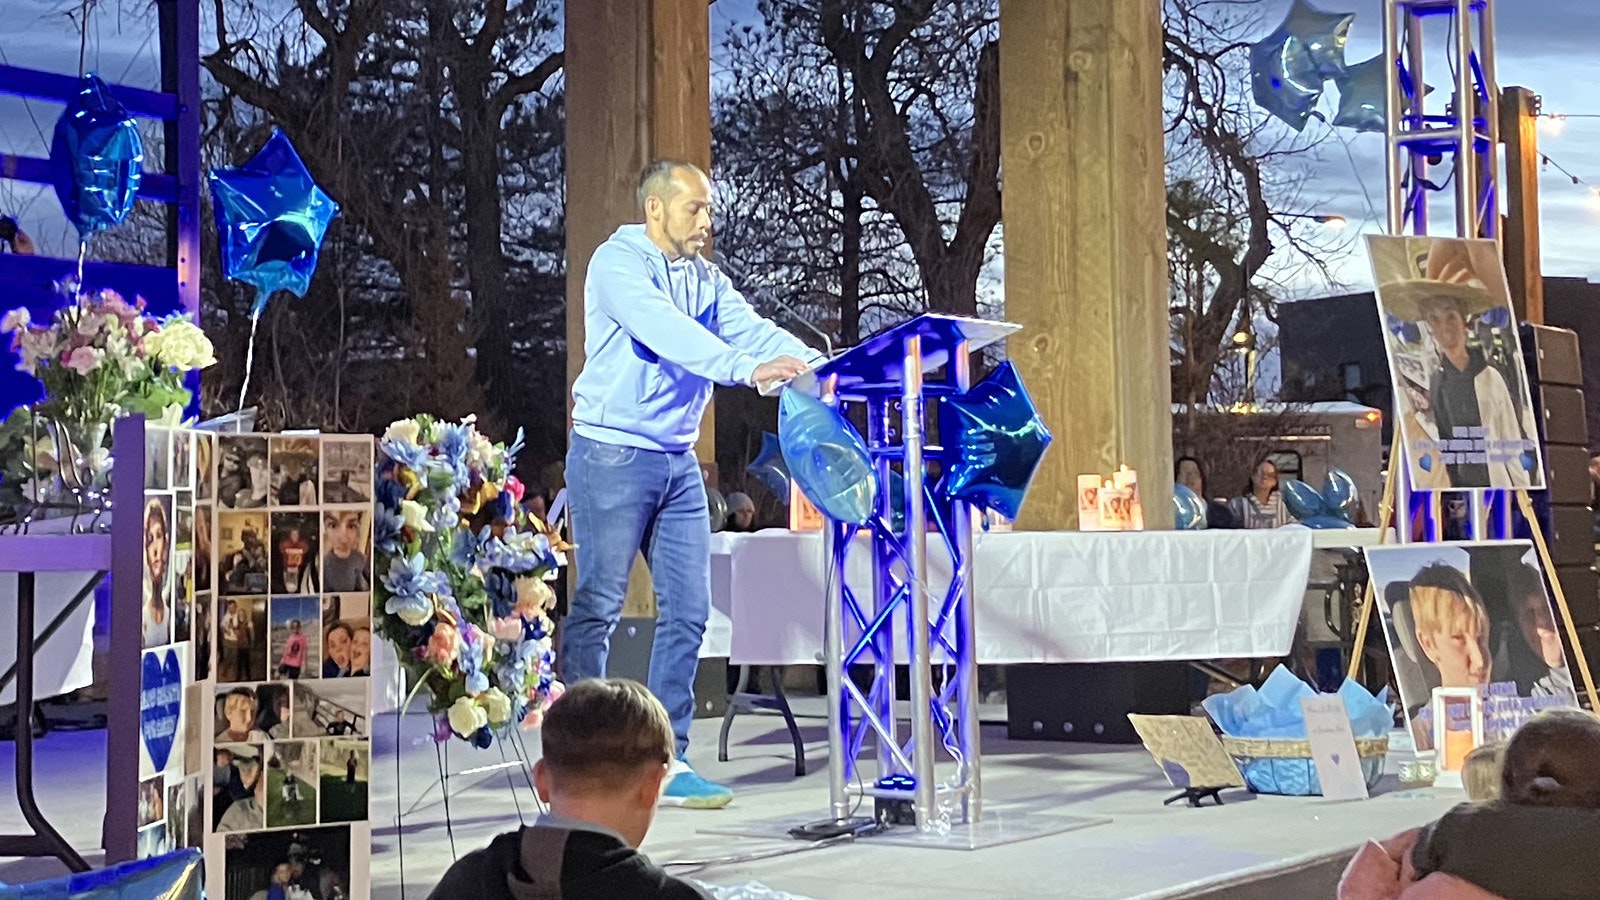 D.C. Martinez shares his heart with more than 4,000 Casper area residents at a vigil for 14-year-old Bobby Maher, who was fatally stabbed on April 7 at the city’s mall.